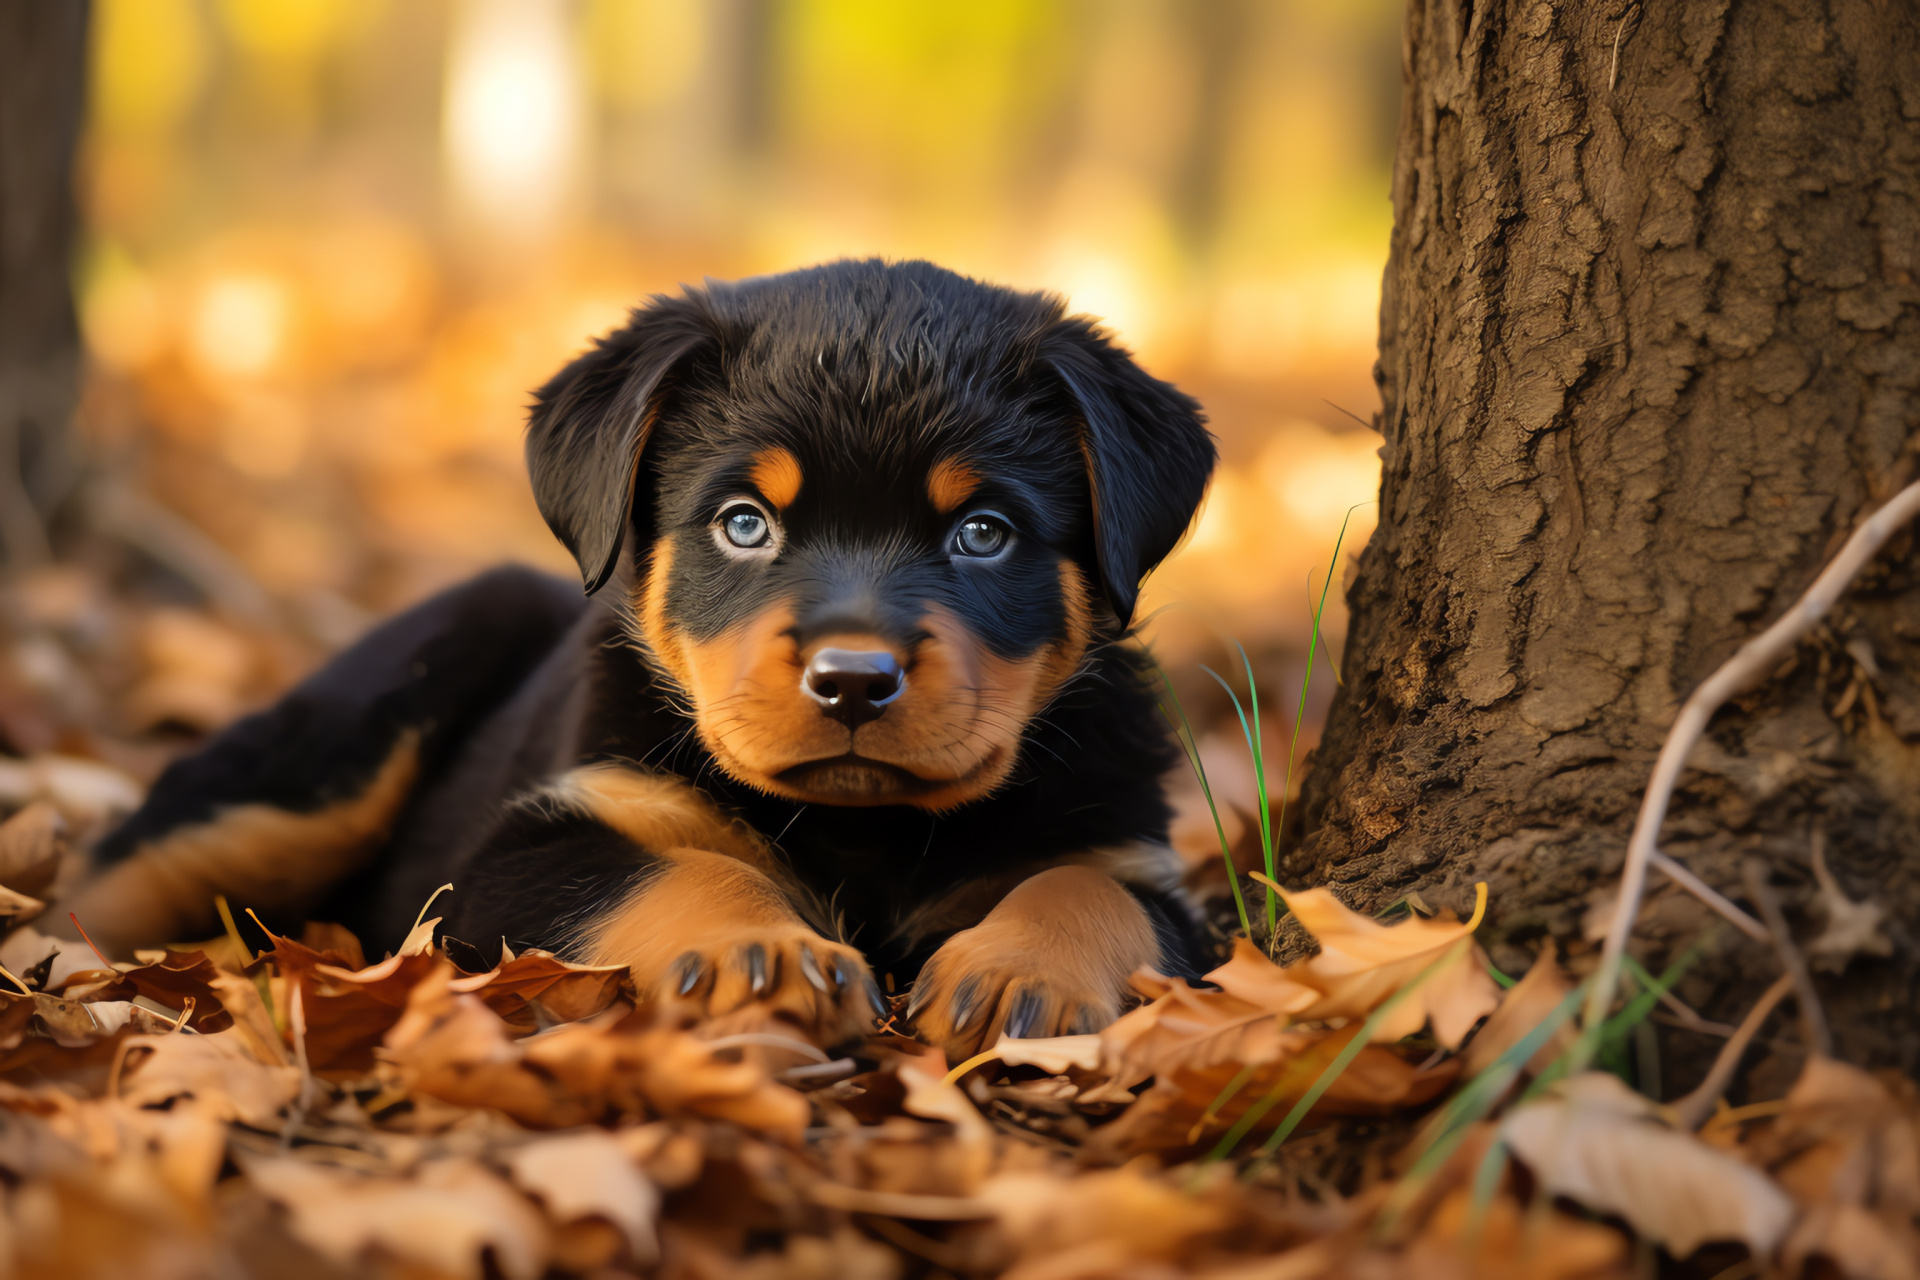 Young rottweiler, Playful pup, Glossy fur, Canine markings, Domestic animal, HD Desktop Image